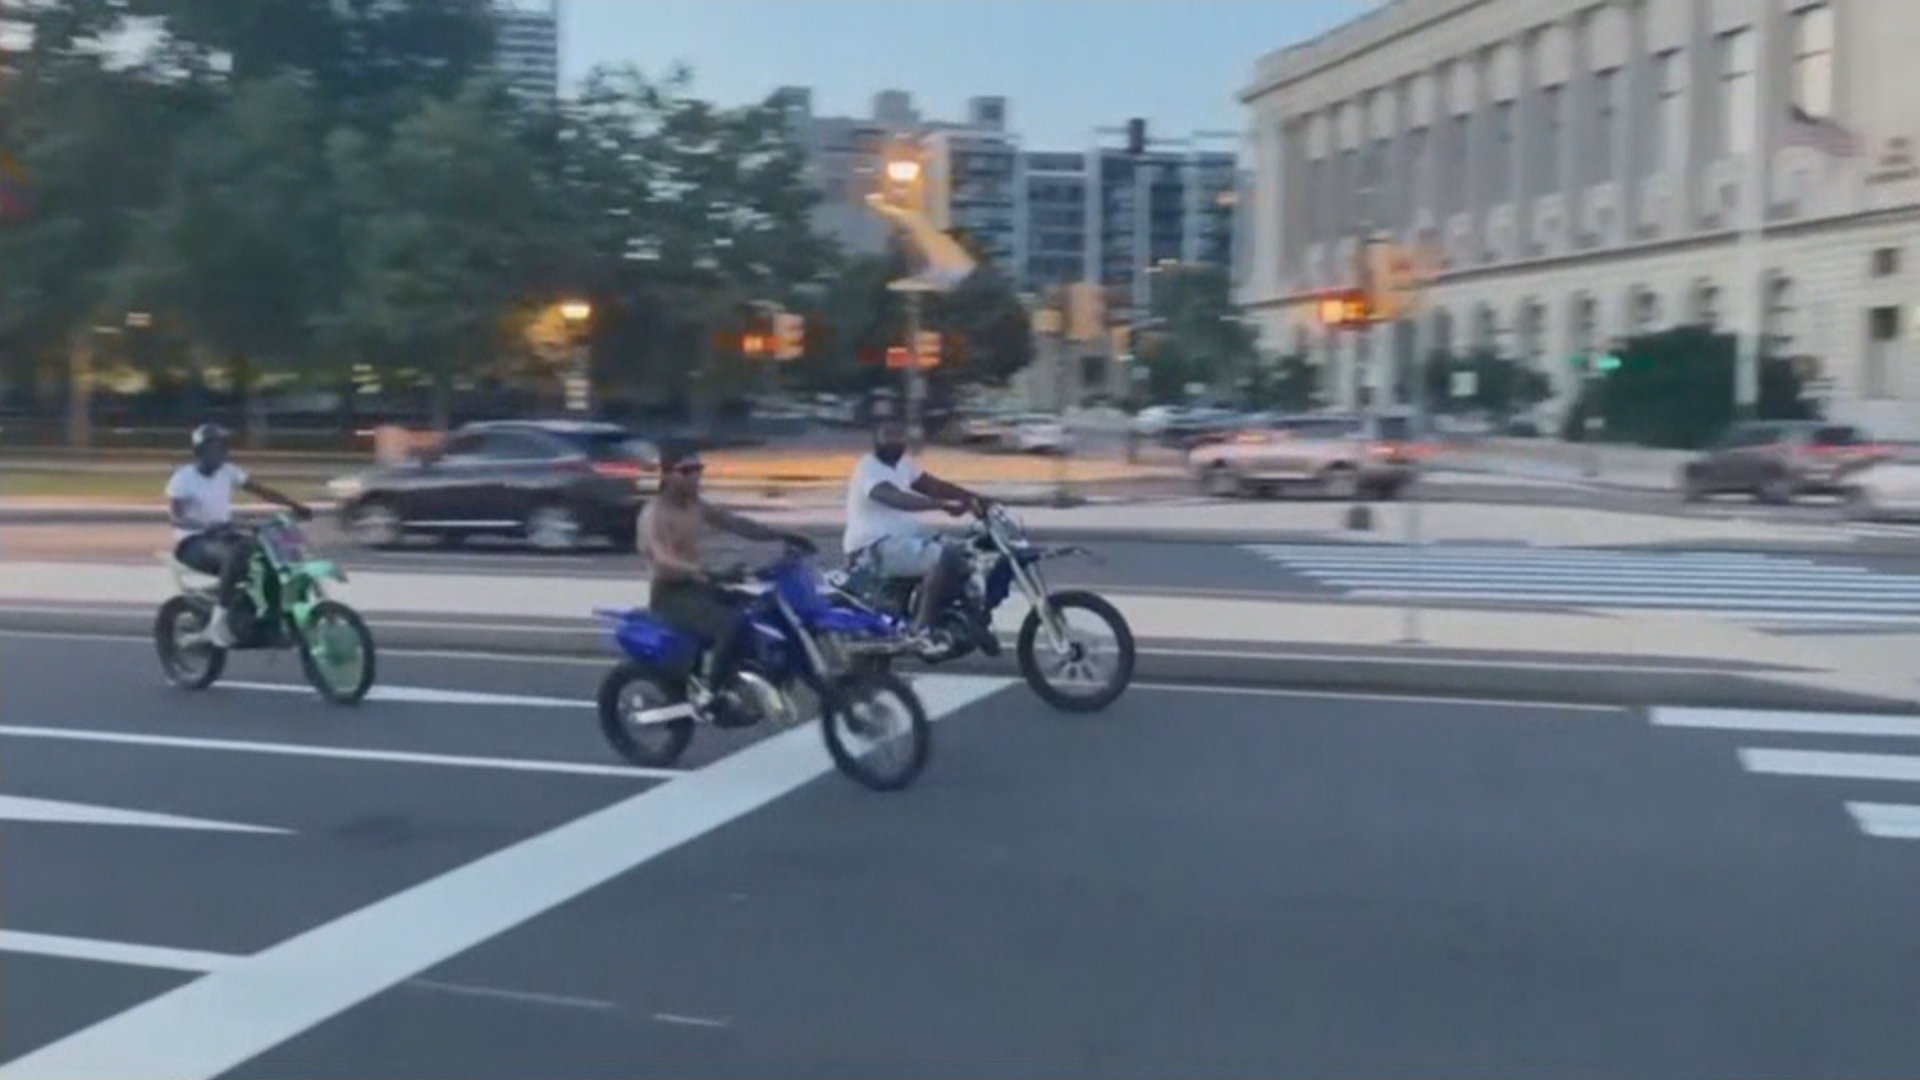 Philadelphia Police Appear To Be Cracking Down On Illegal ATVs, Dirt Bikes On City Streets